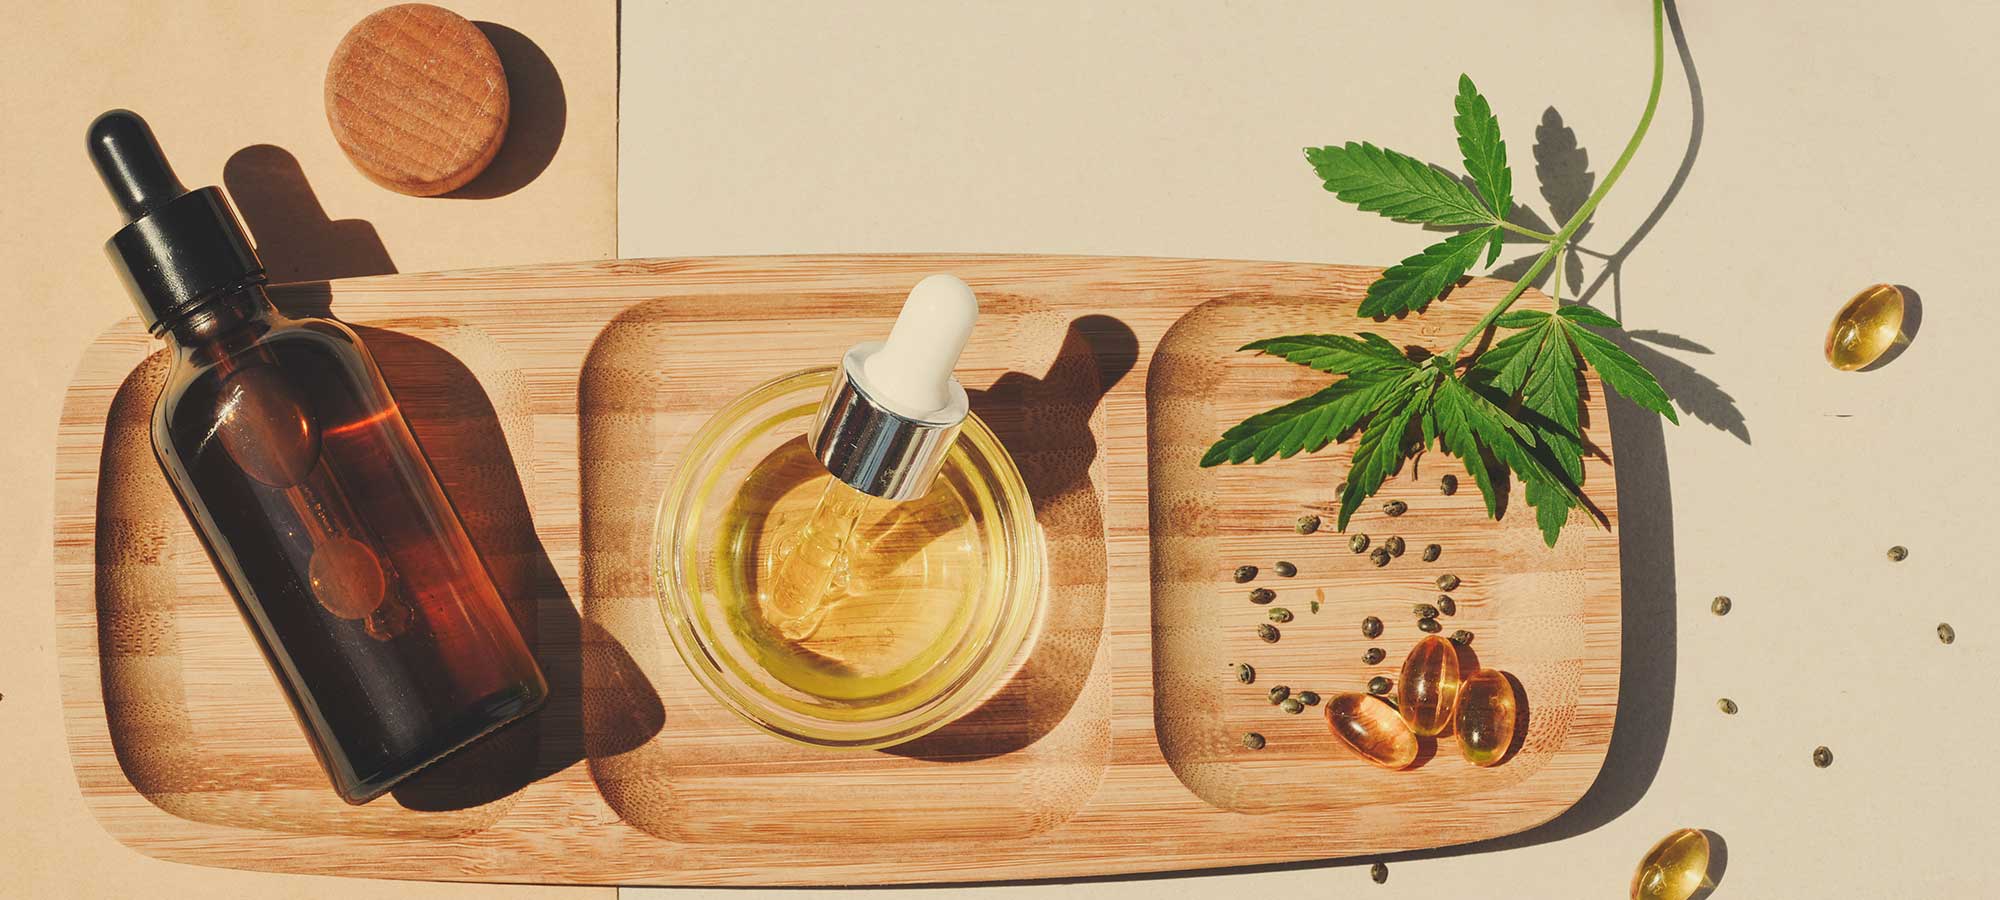 ingenious ways to incorporate medical cannabis into your life